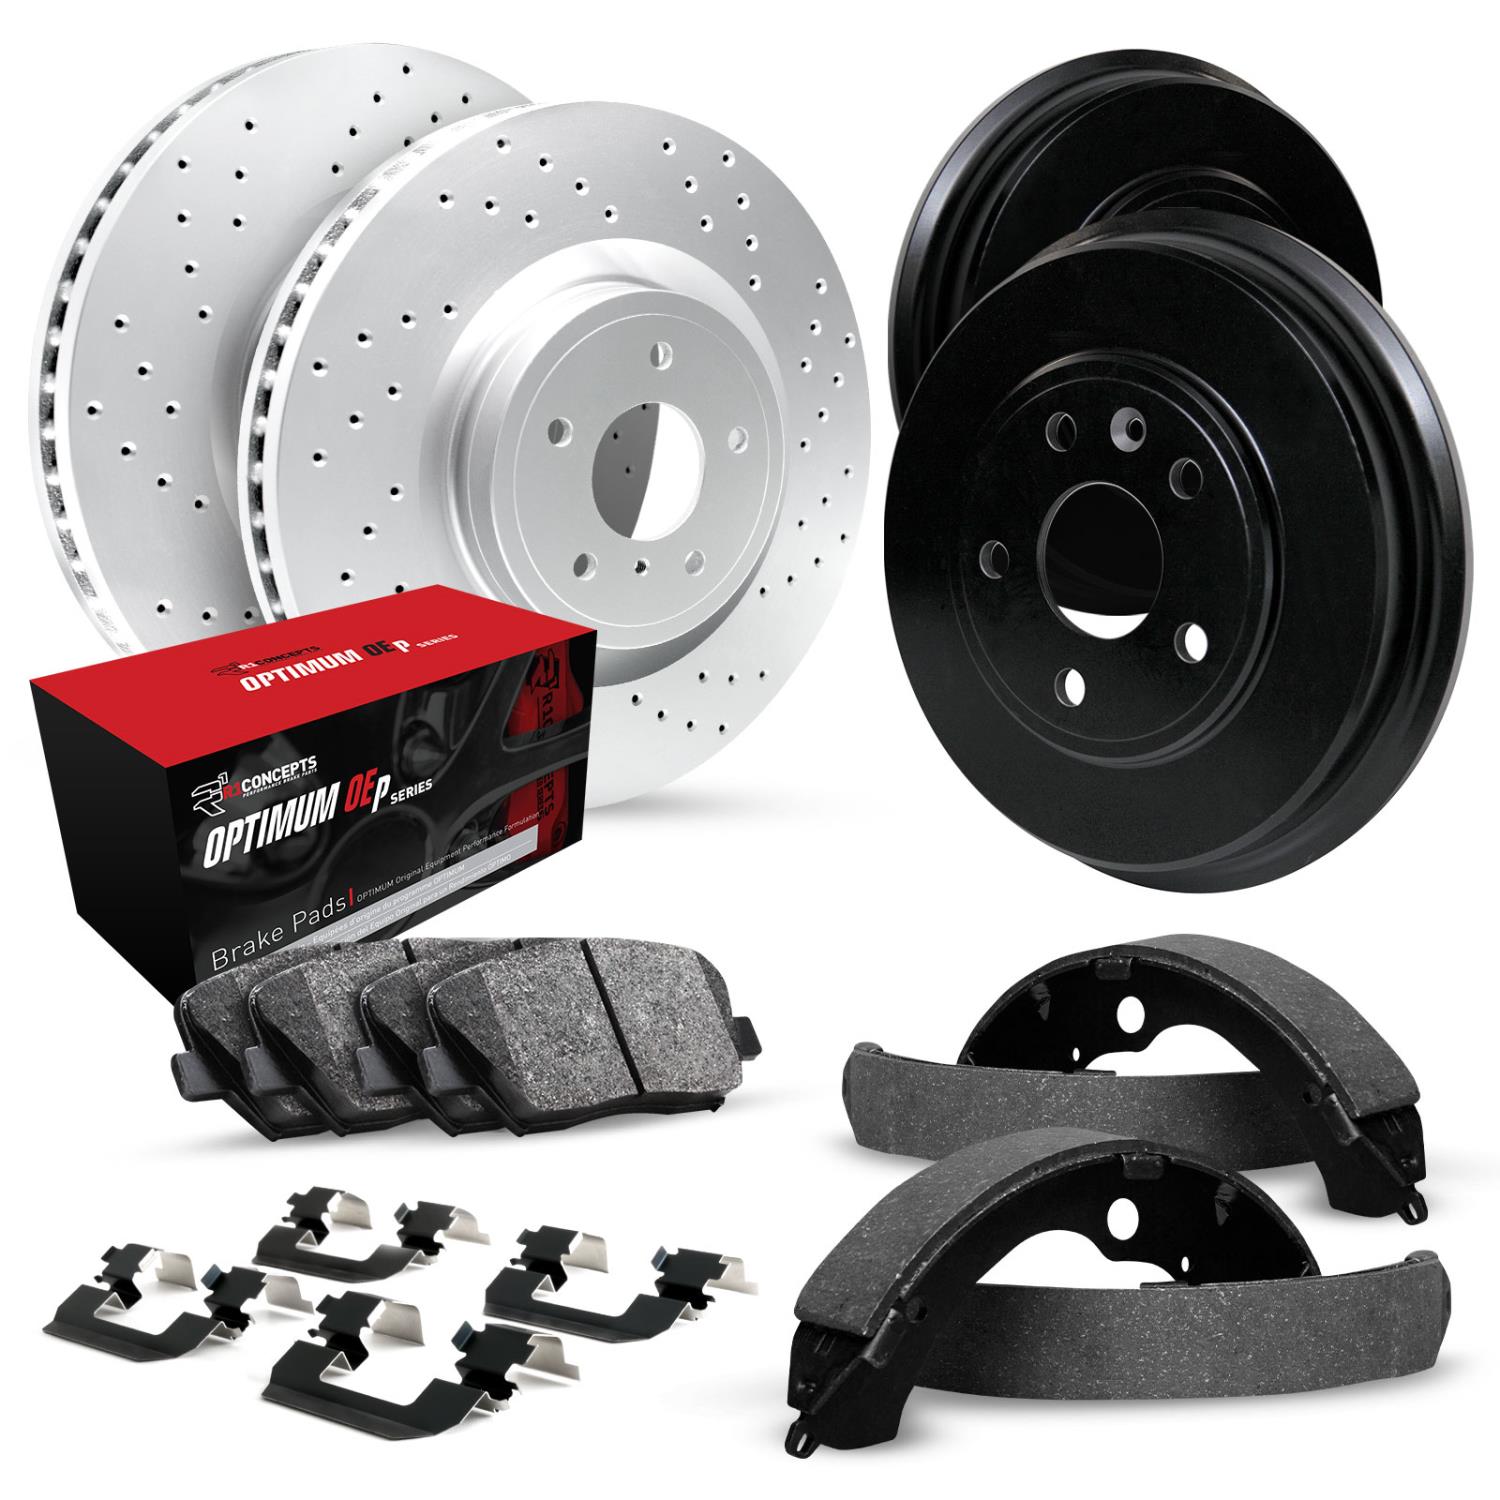 GEO-Carbon Drilled Brake Rotor & Drum Set w/Optimum OE Pads, Shoes, & Hardware, 1976-1989 GM, Position: Front & Rear